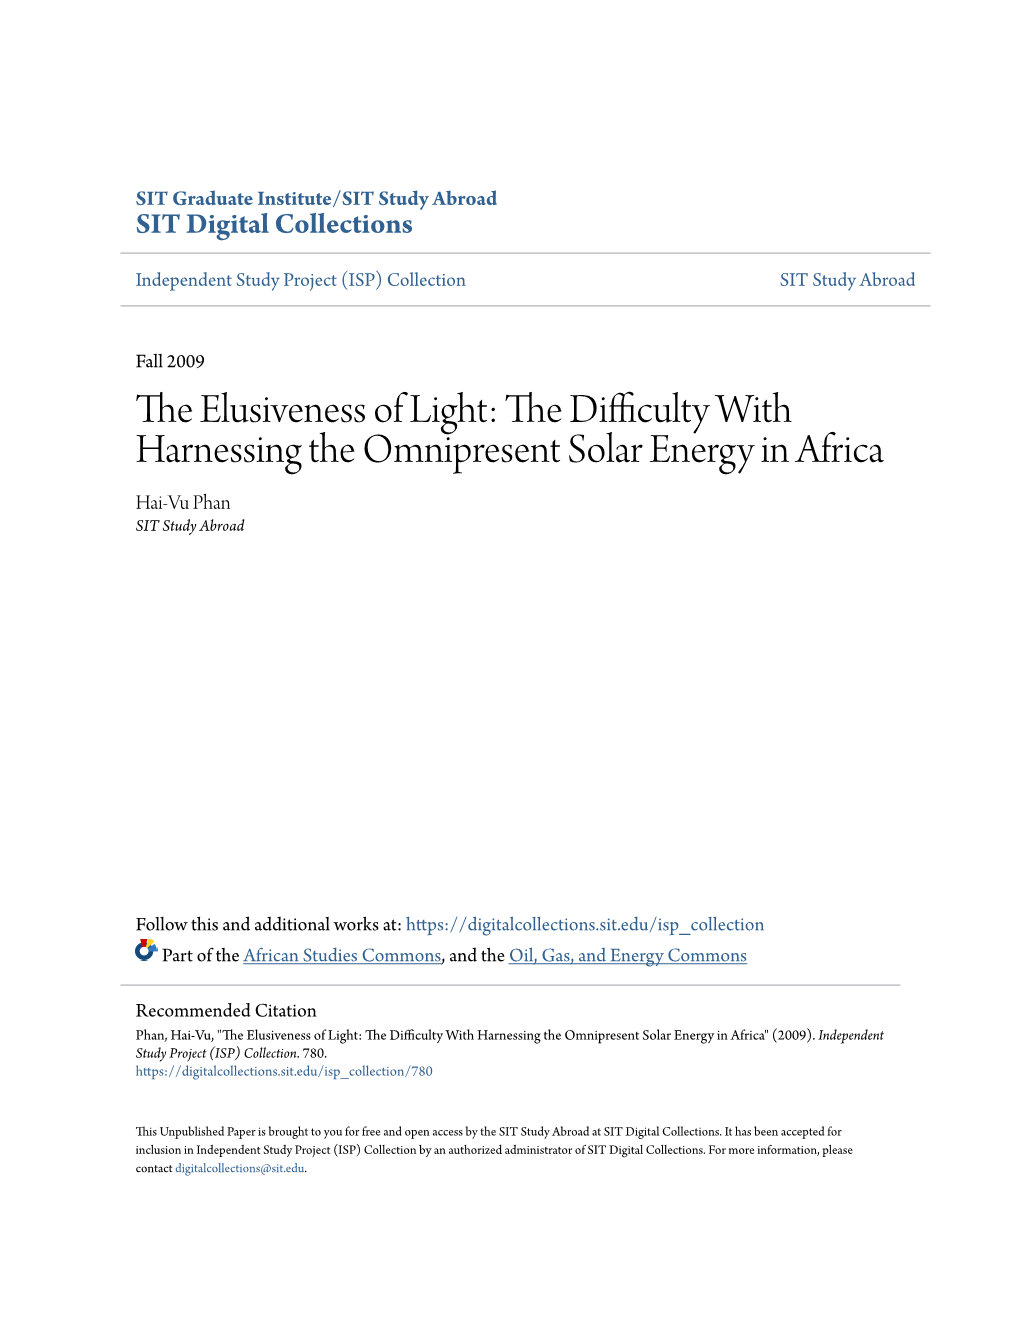 The Difficulty with Harnessing the Omnipresent Solar Energy in Africa Hai-Vu Phan SIT Study Abroad